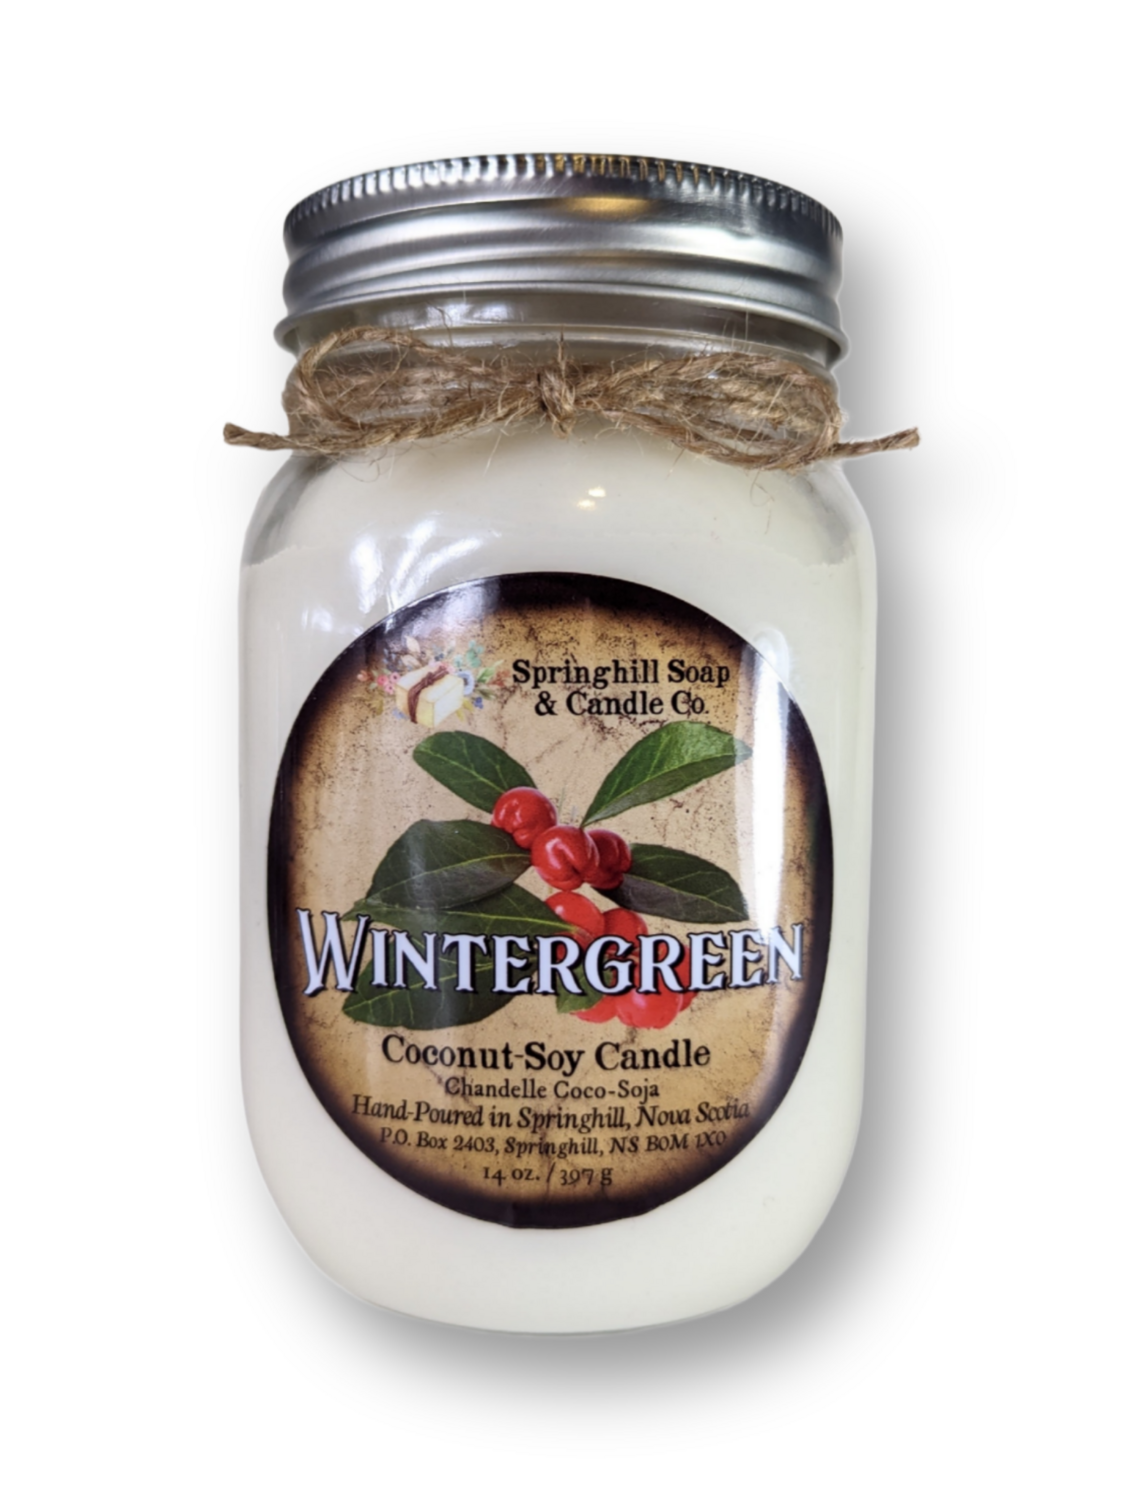 Wintergreen 14oz Coconut-Soy Candle